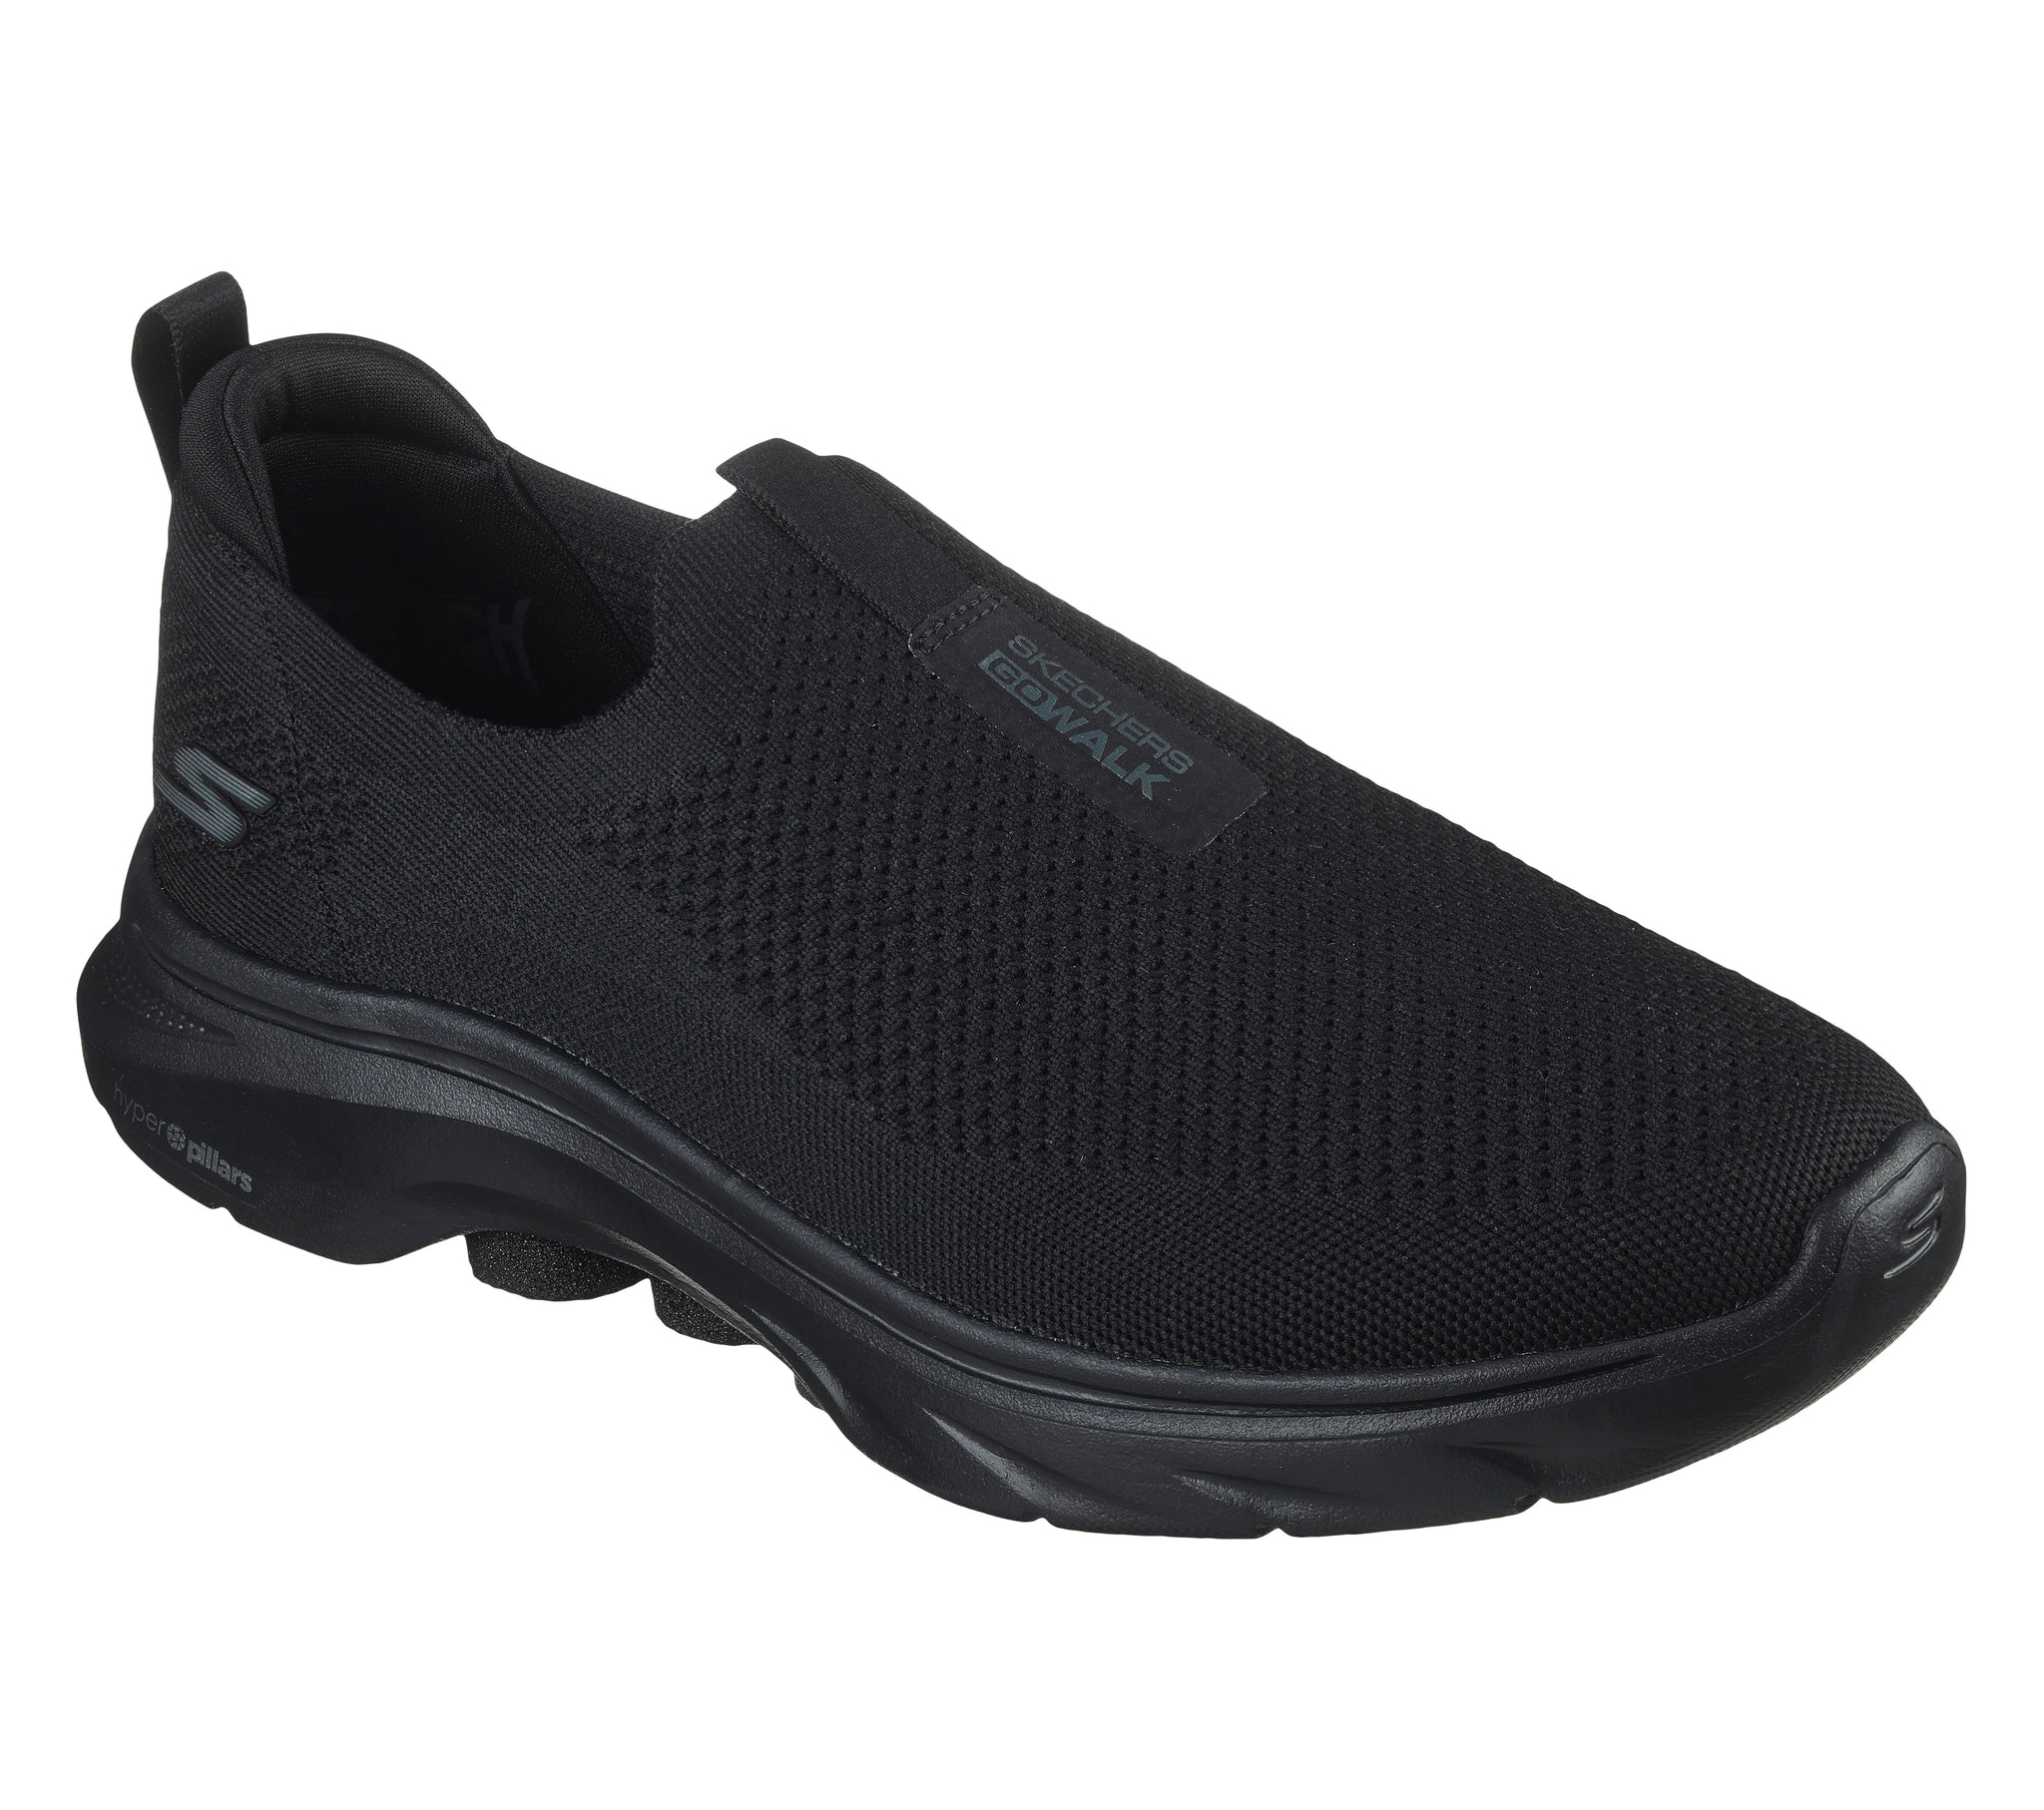 Skechers Go Walk 7-The Construct Black White Men Casual Shoes 216636-BKW